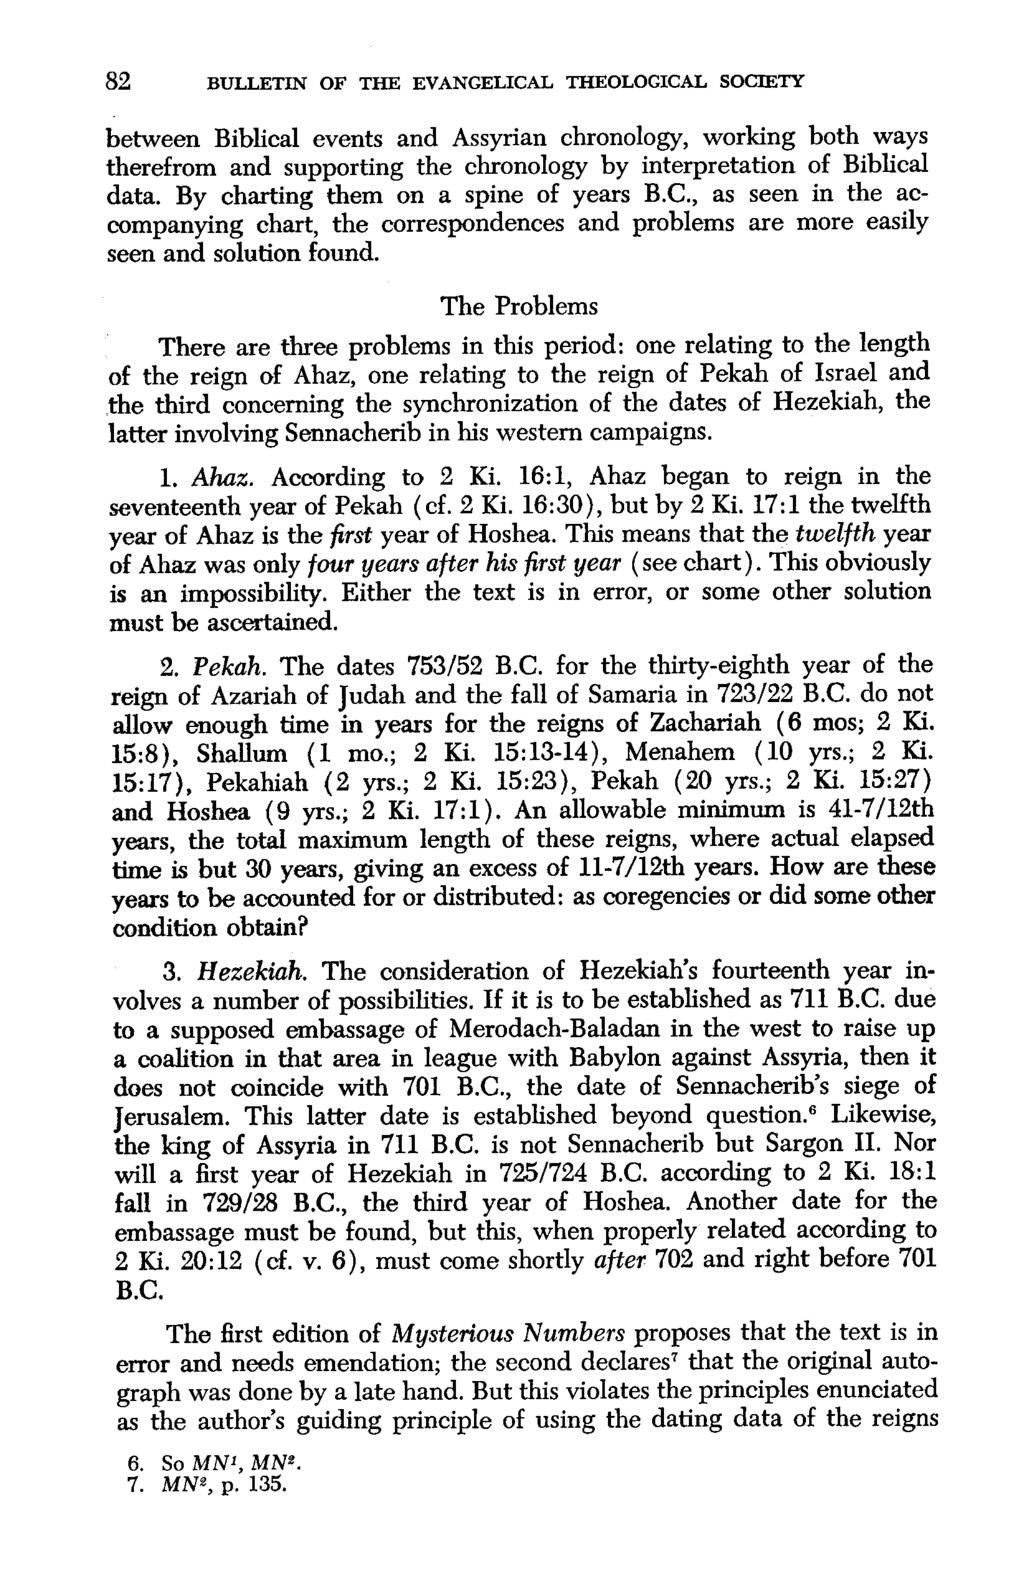 82 BULLETIN OF THE EVANGELICAL THEOLOGICAL SOCIETY between Biblical events and Assyrian chronology, working both ways therefrom and supporting the chronology by interpretation of Biblical data.